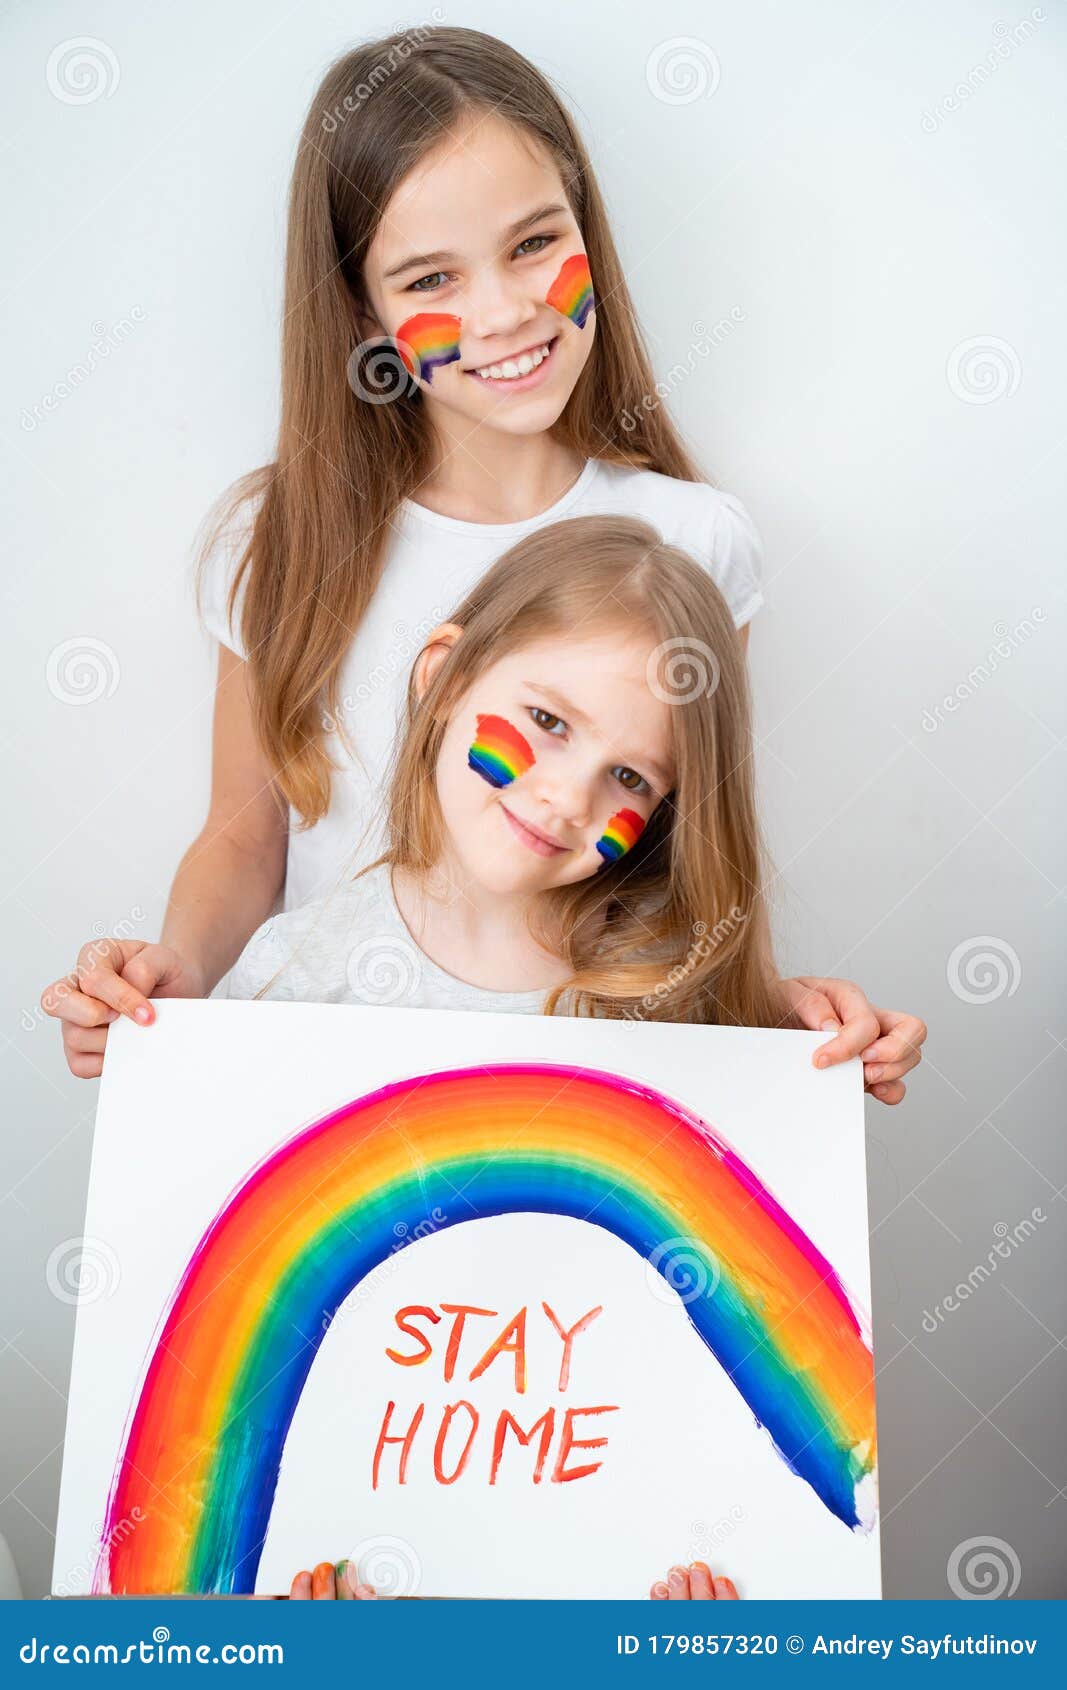 kids drew rainbow and poster stay home.